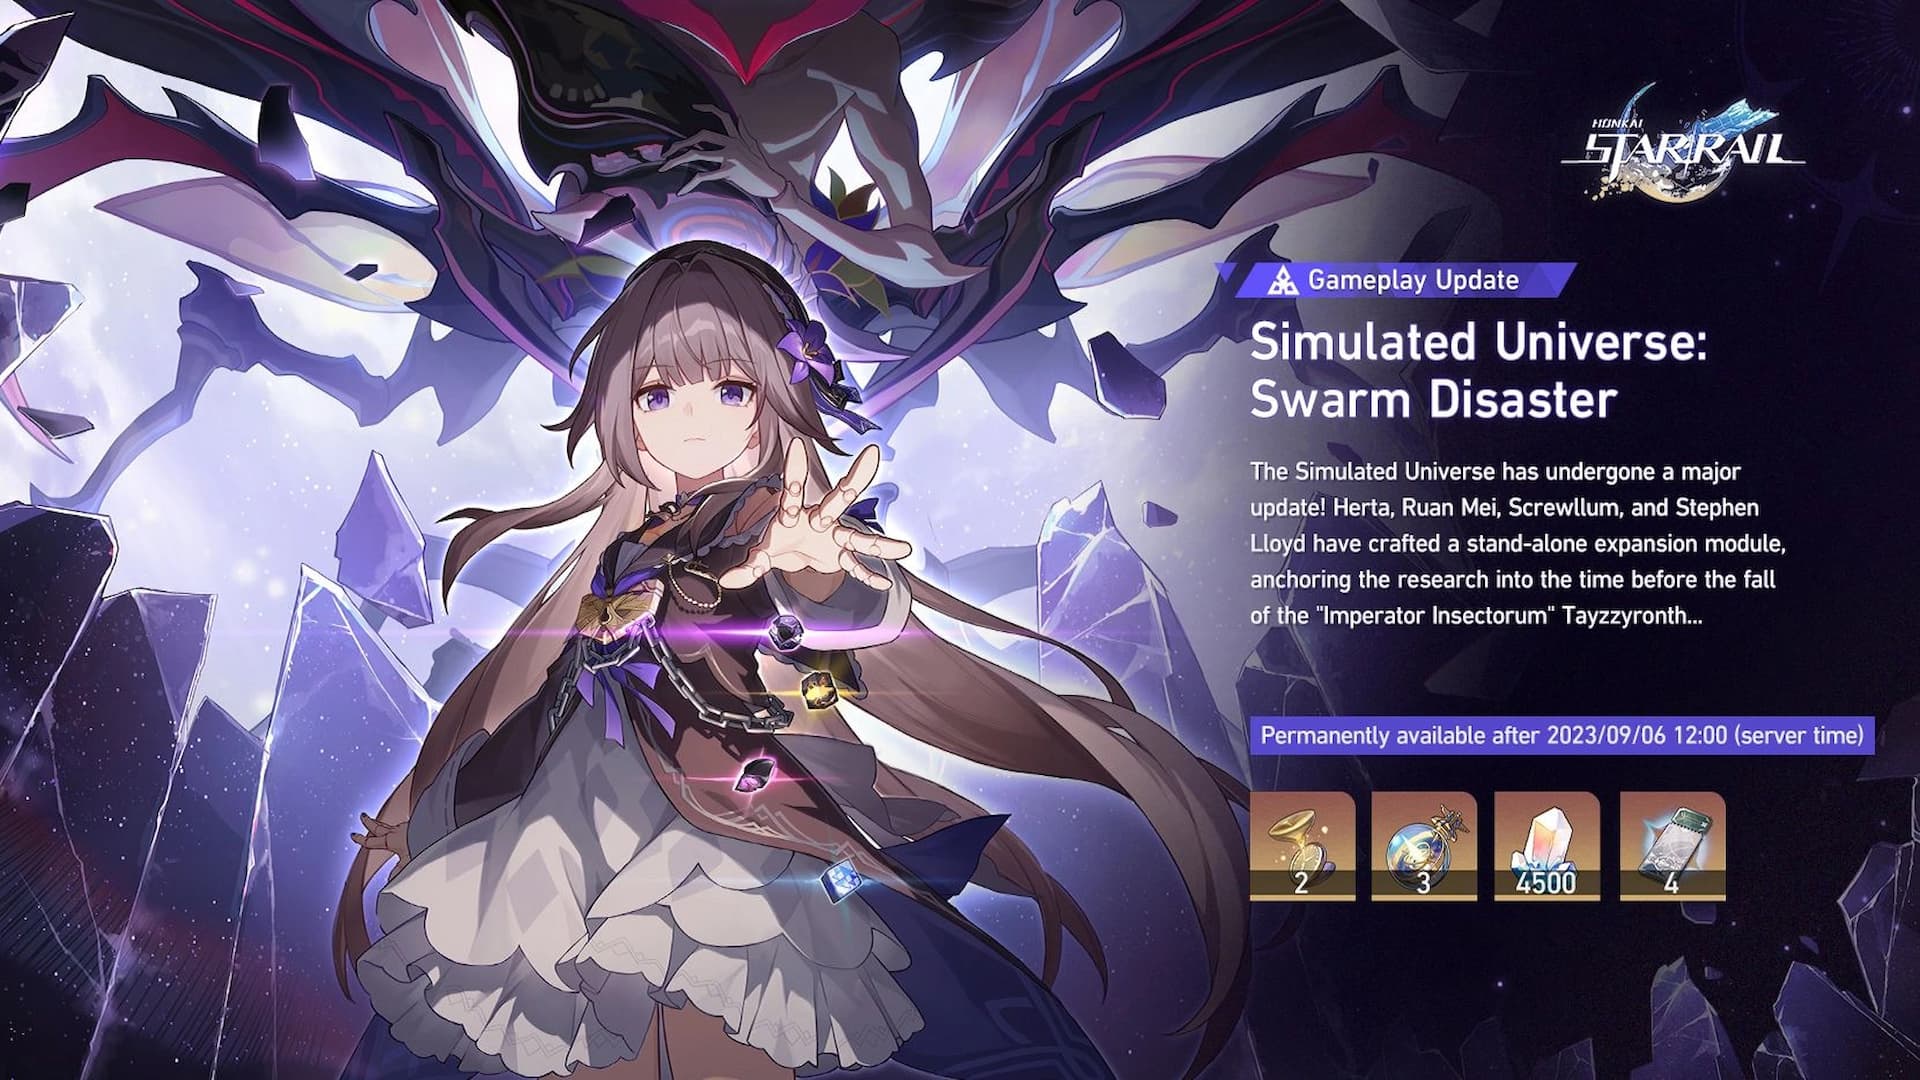 Honkai Star Rail is offering an insane amount of Jade in new game mode: anime girl splash art next to text describing an event